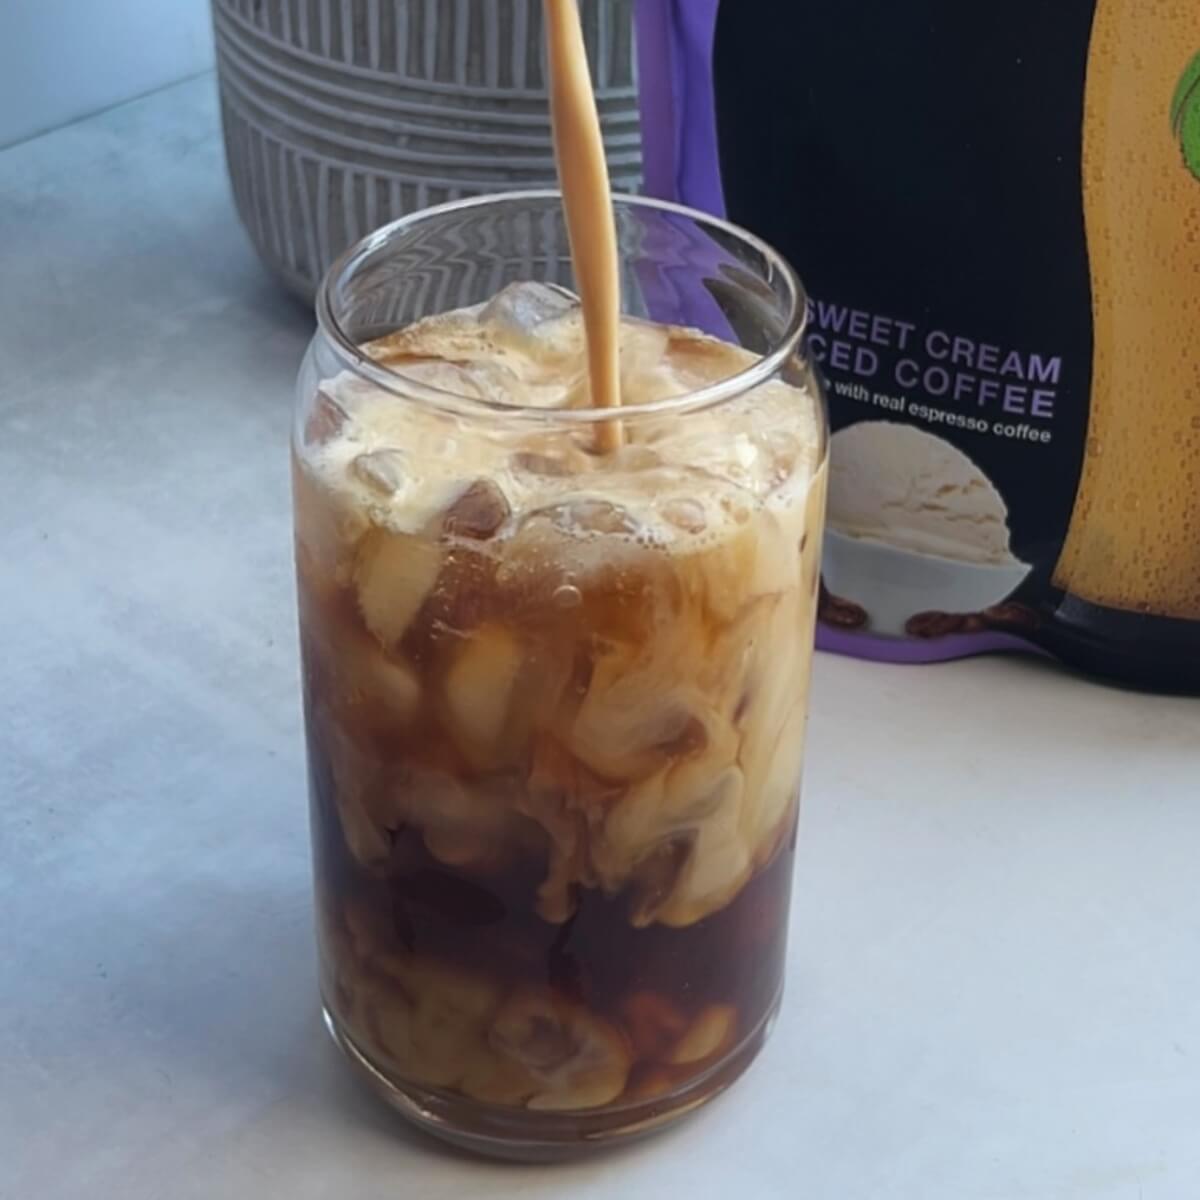 at home sweet cream cold brew with protein